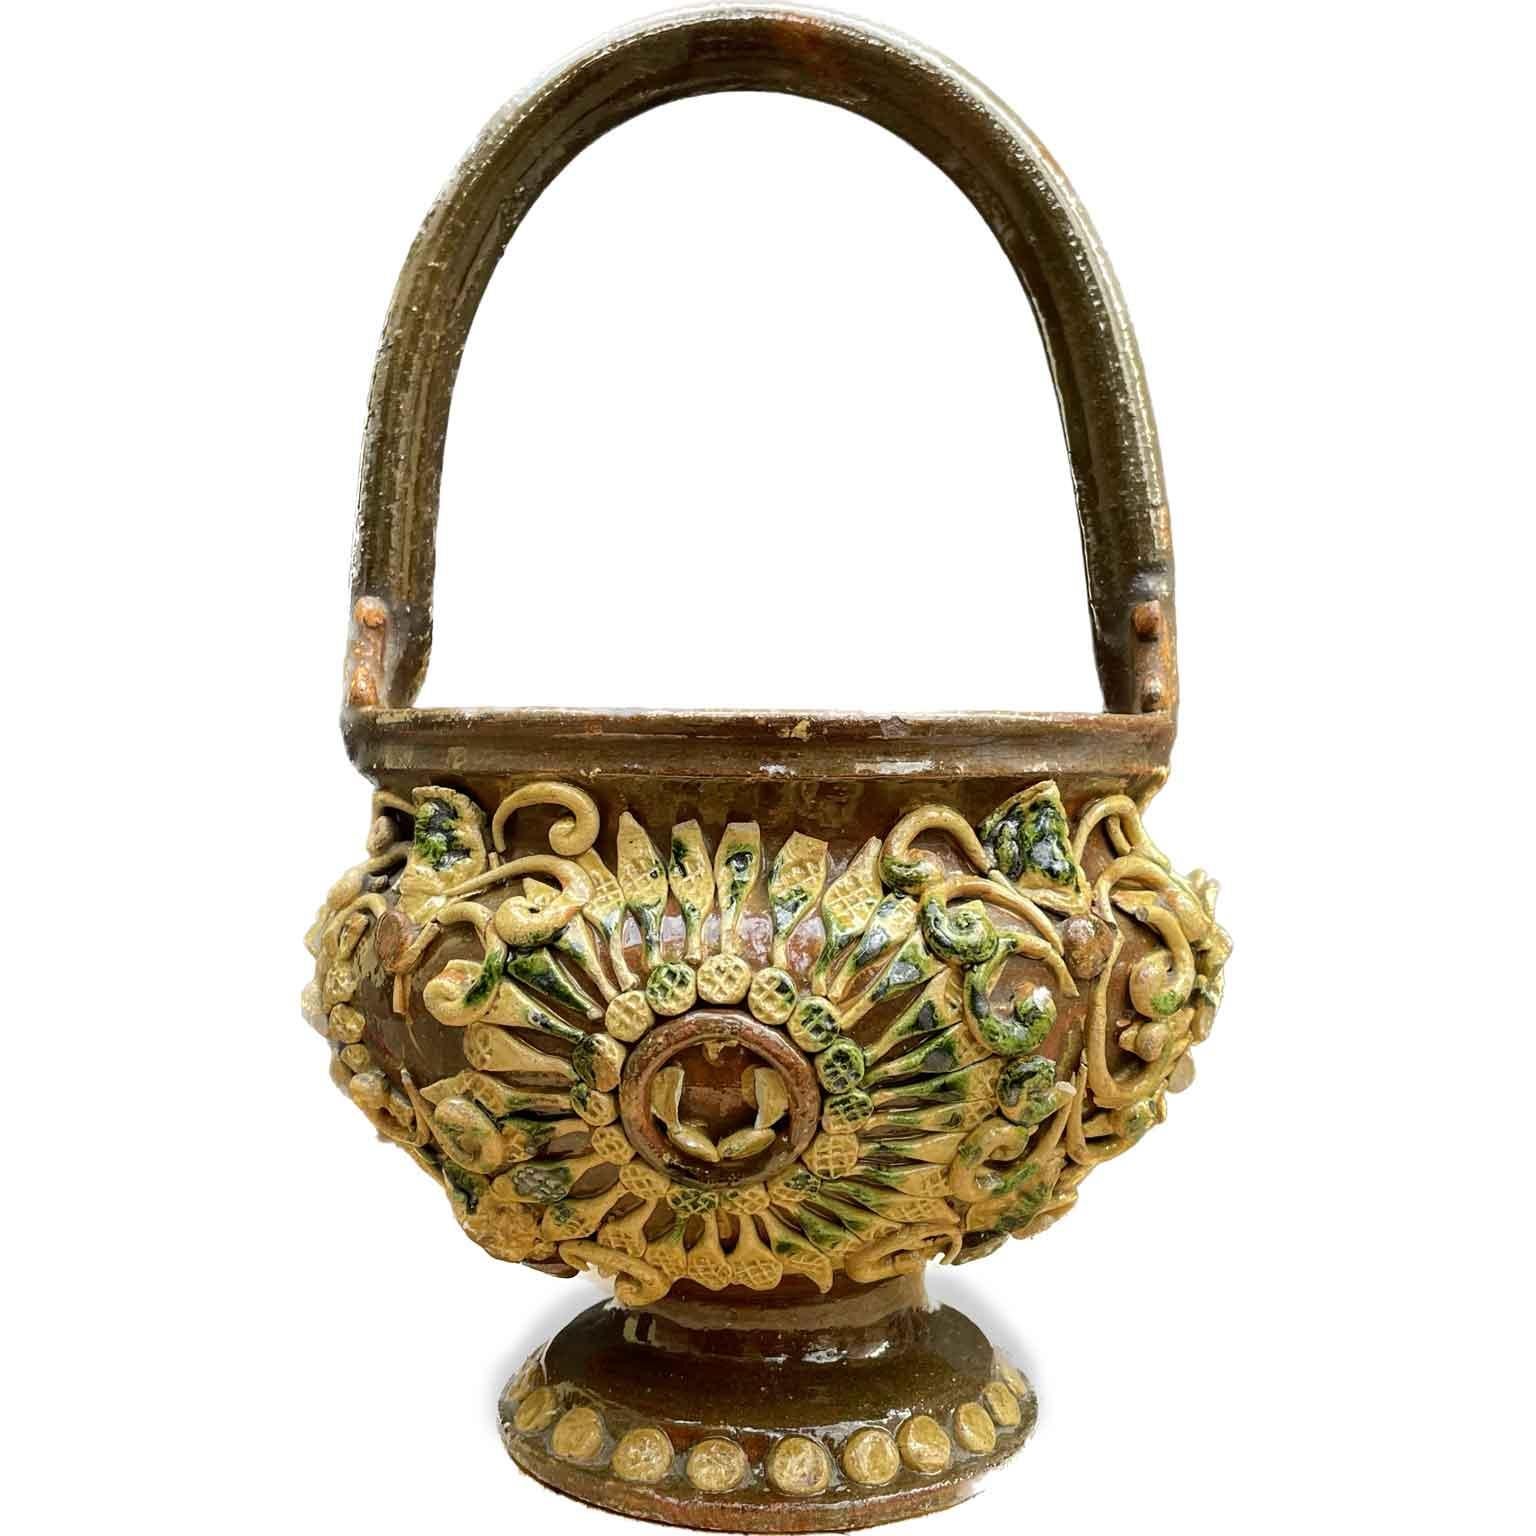 Arts and Crafts Mid-19th Century Italian Tuscan Warmer Basket For Sale